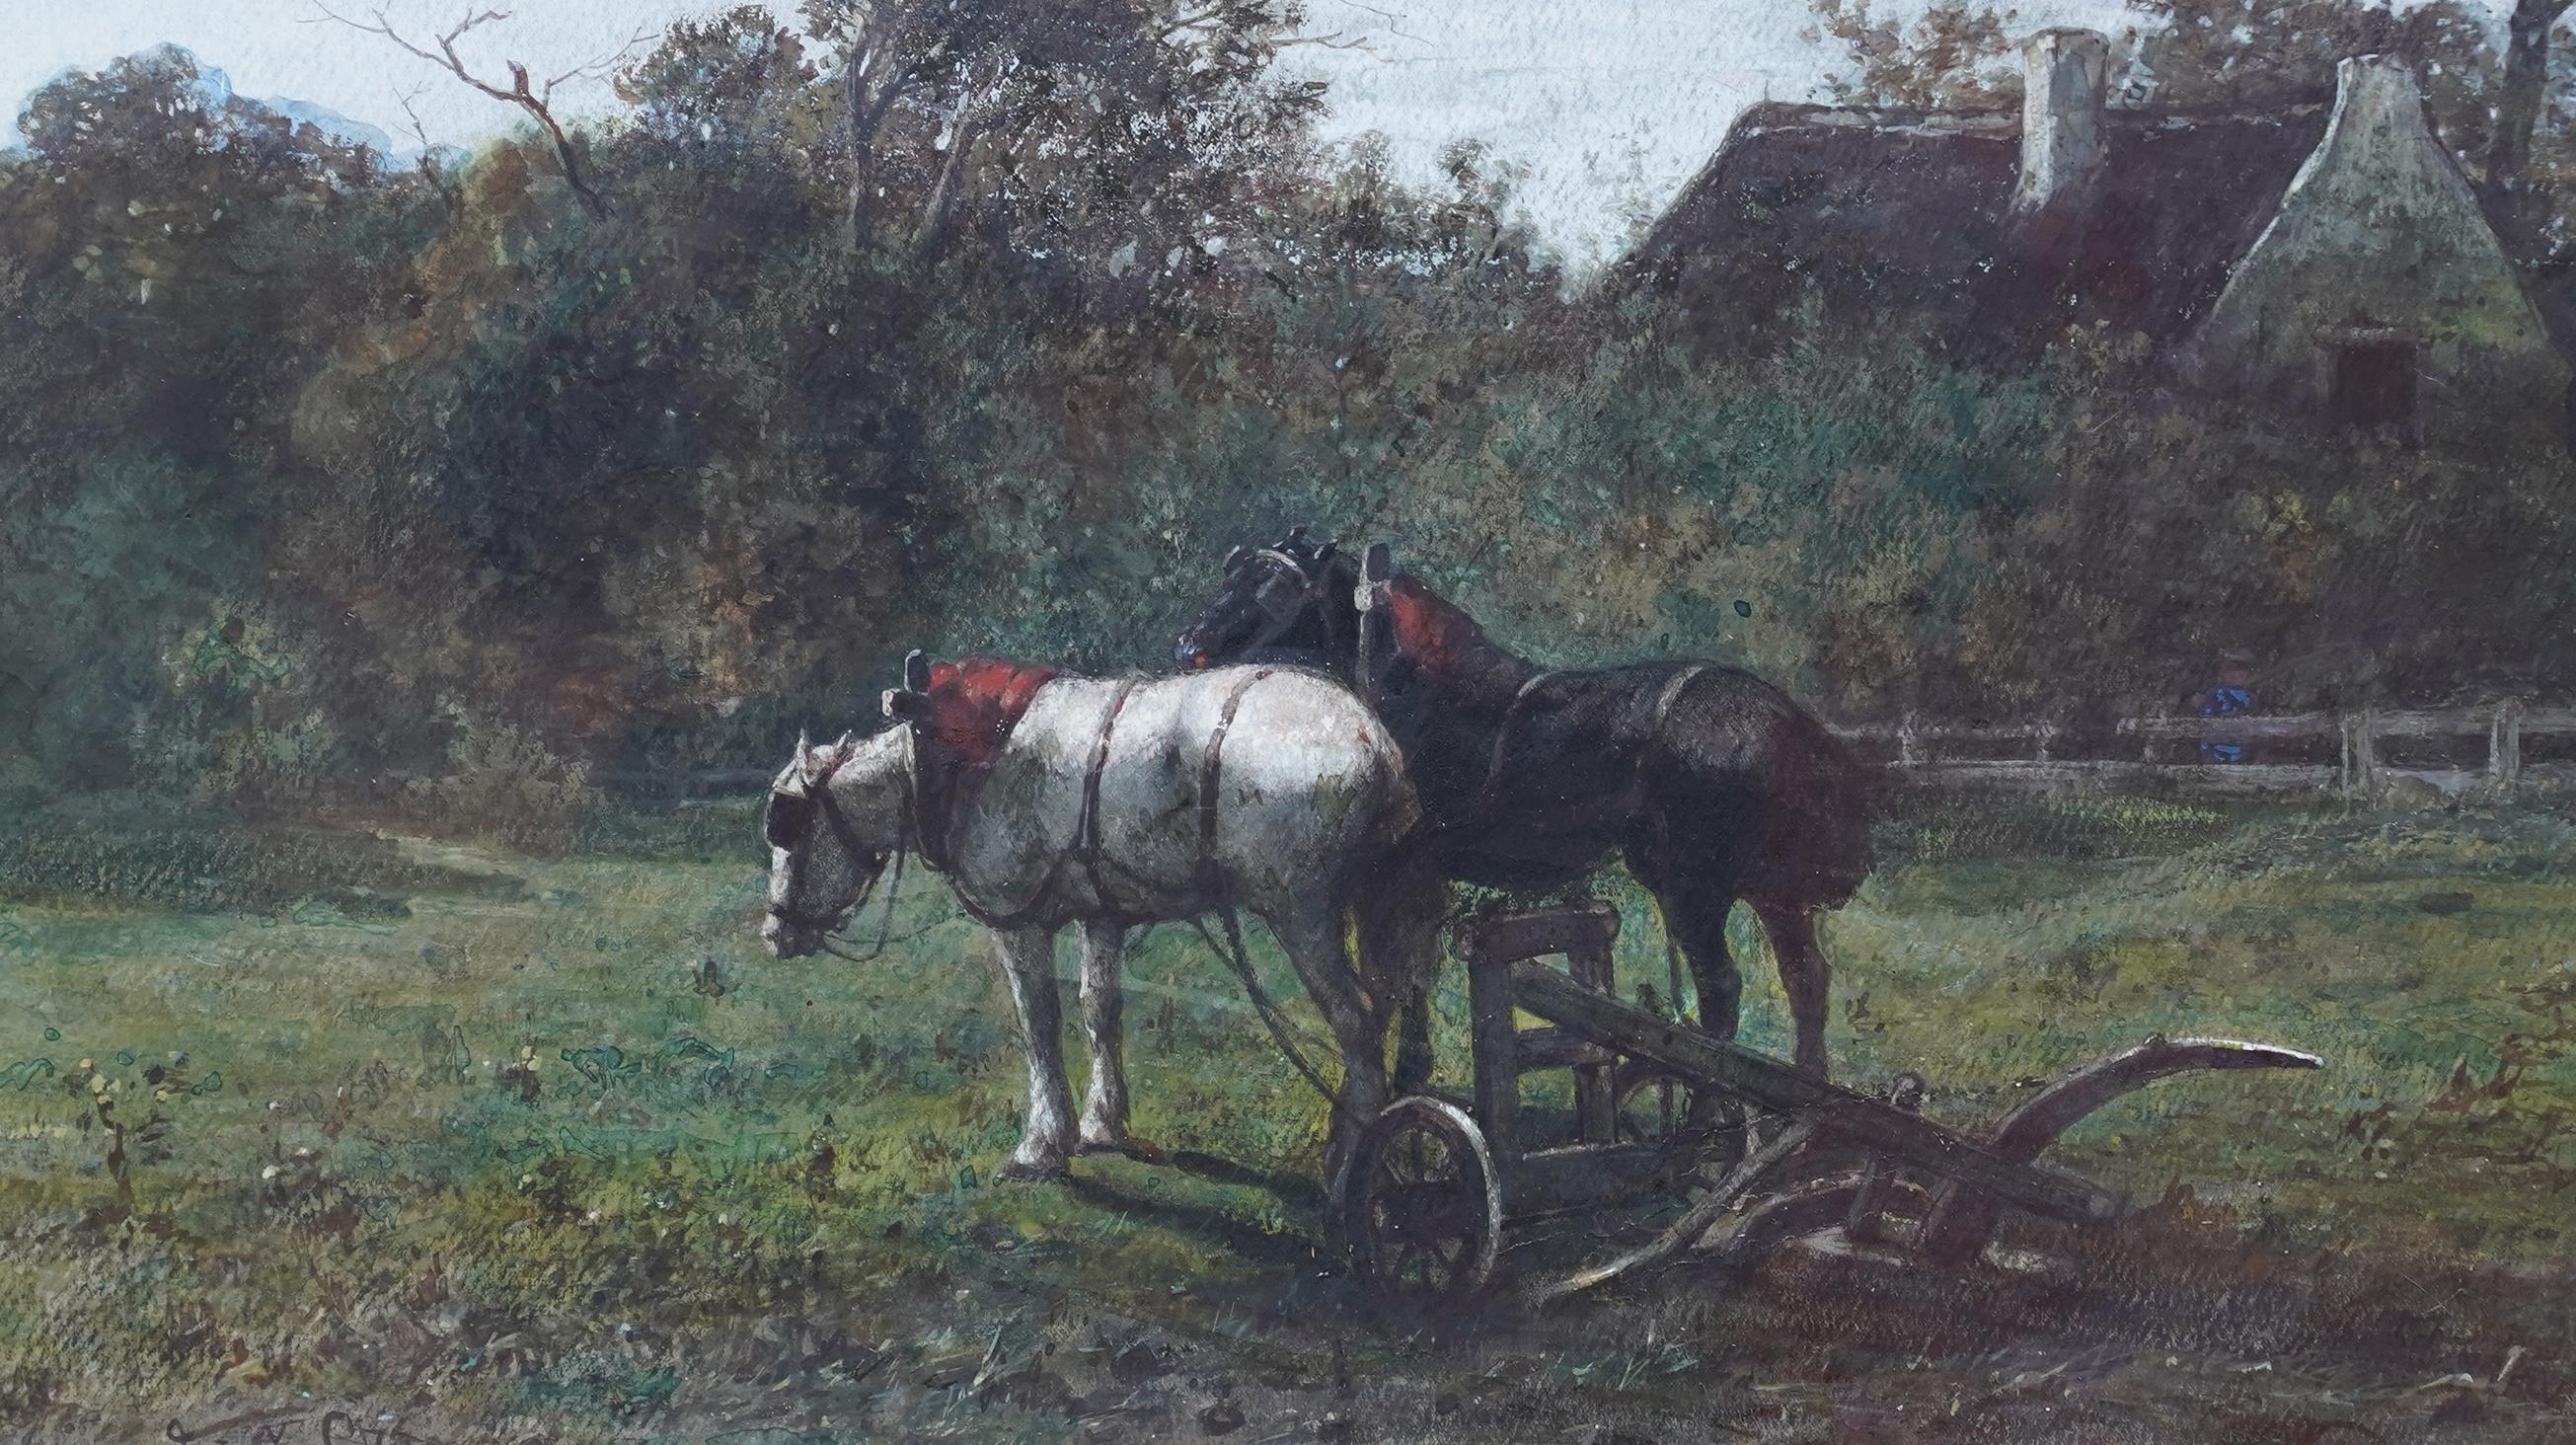 Working Horses in a Landscape - Dutch Victorian animal art equine W/C painting - Realist Art by Johannes Martinus Vrolyk